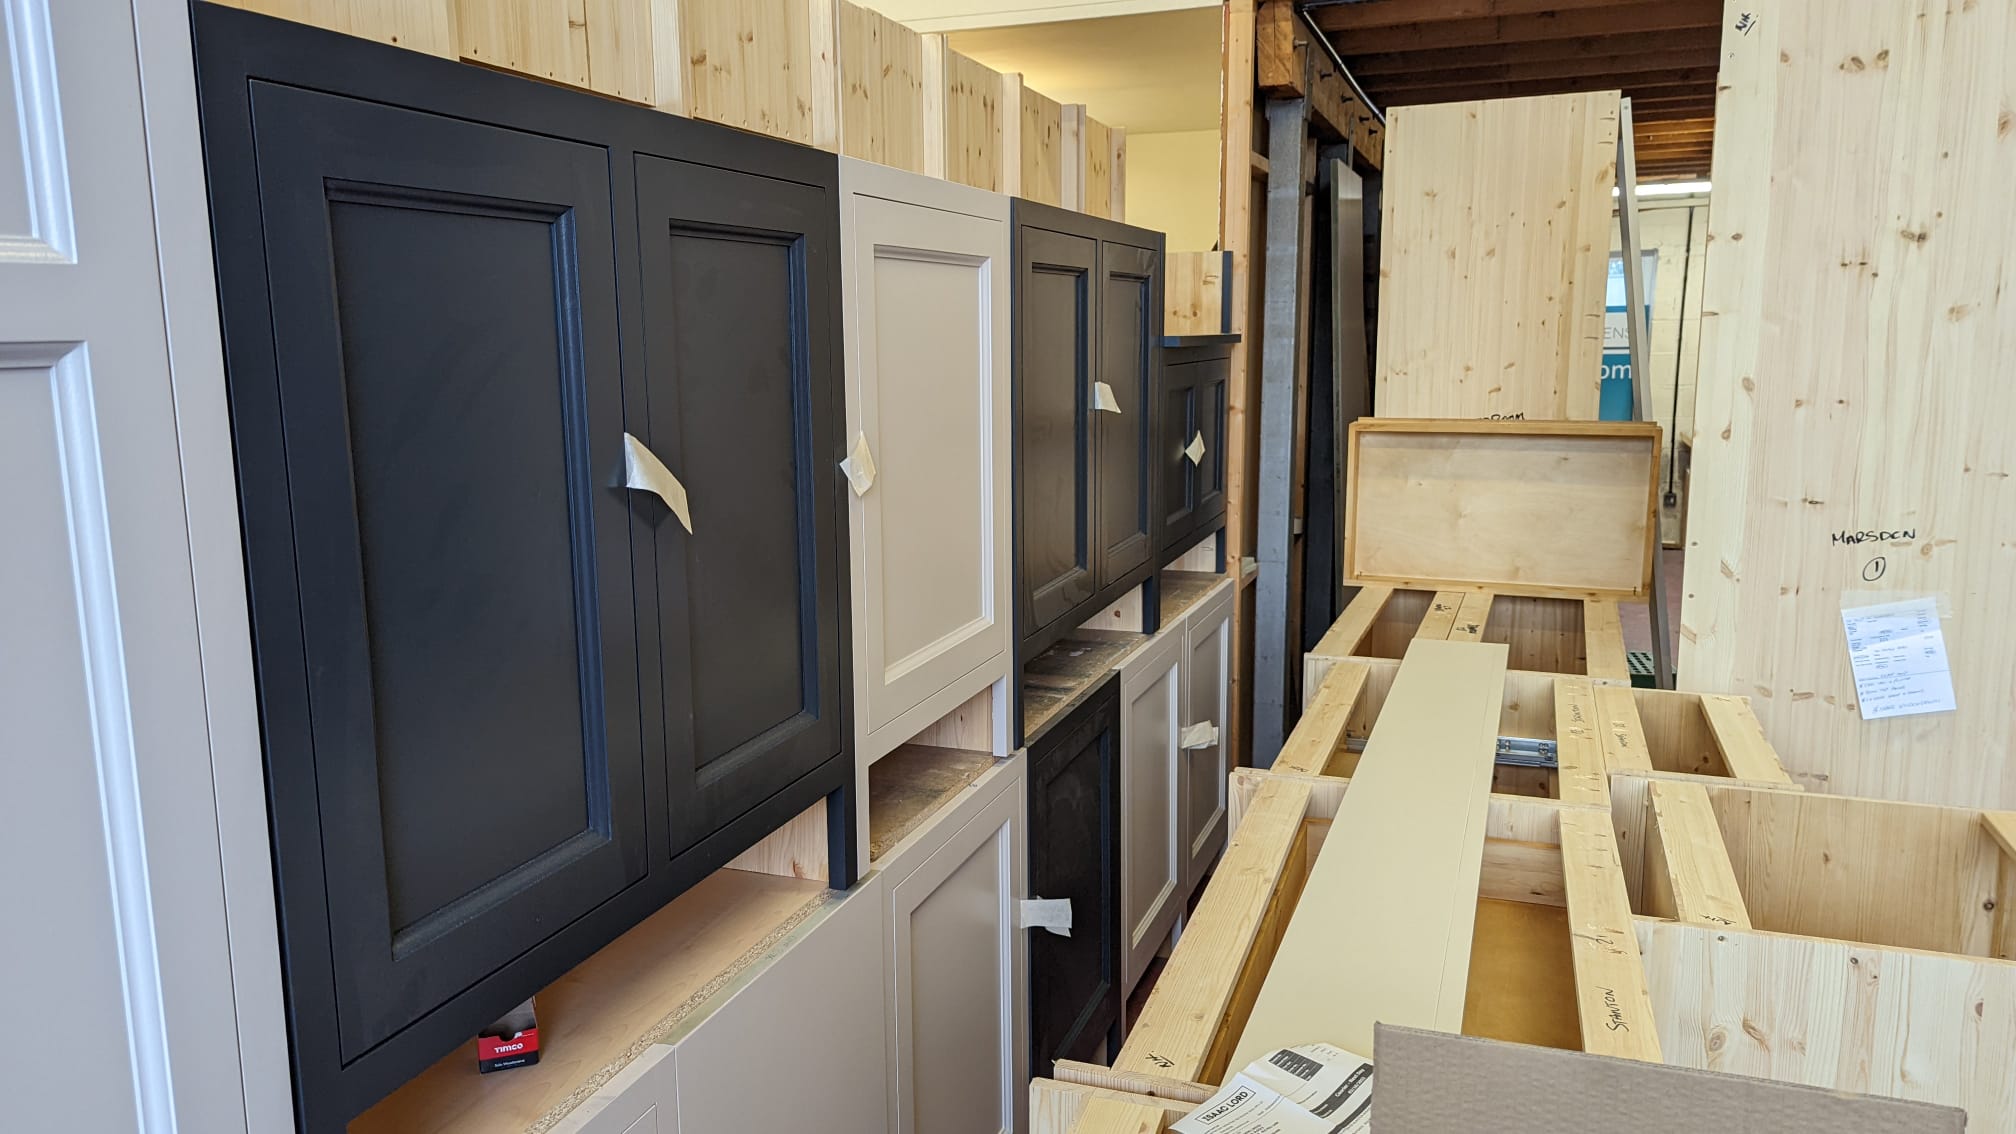 Bespoke kitchen cabinets ready to be delivered